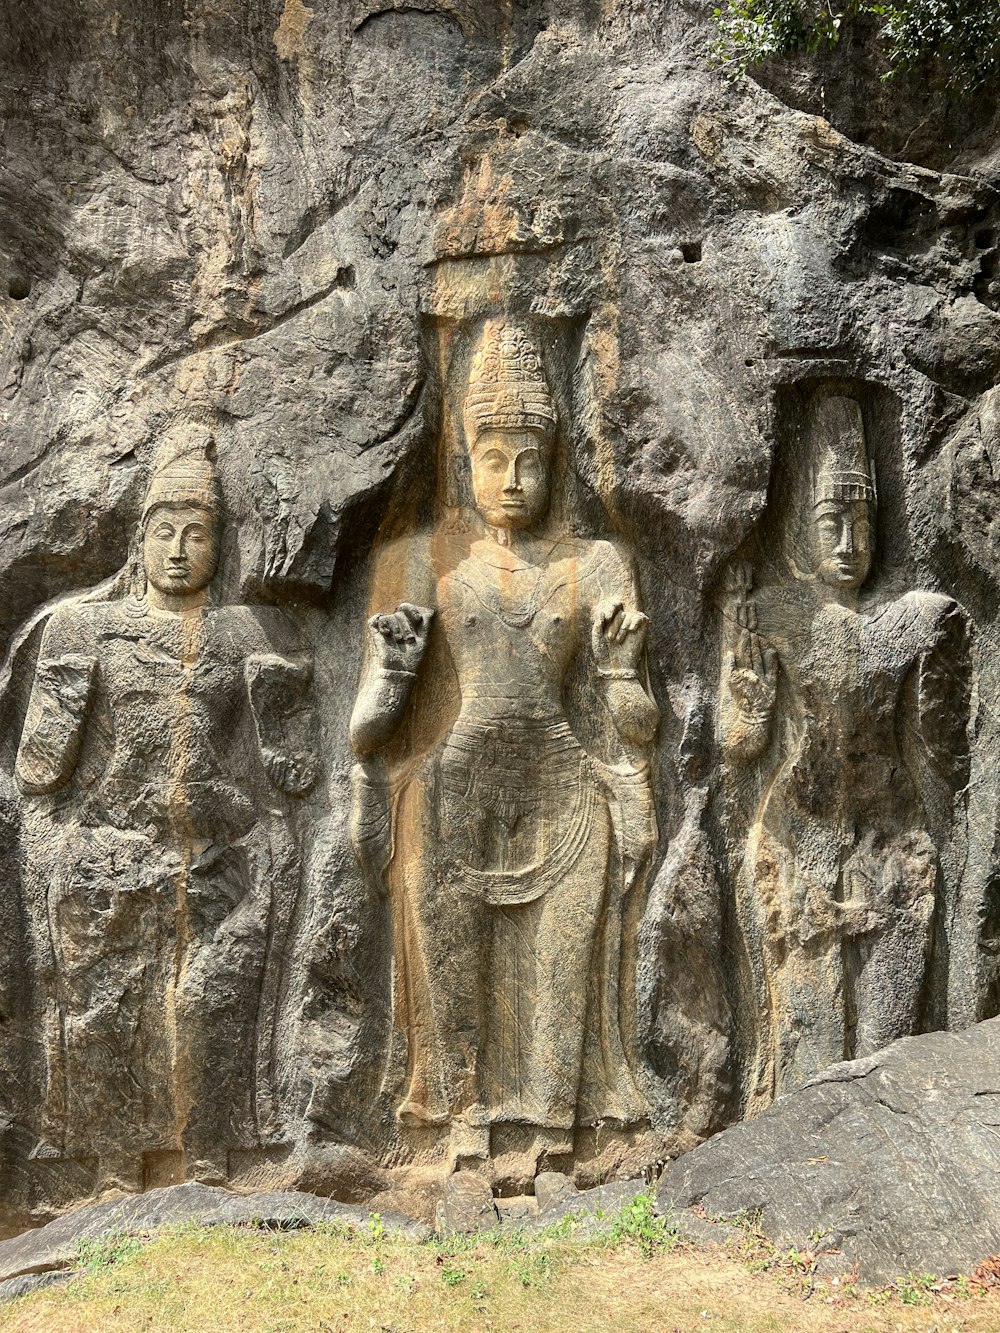 a group of statues on the side of a mountain